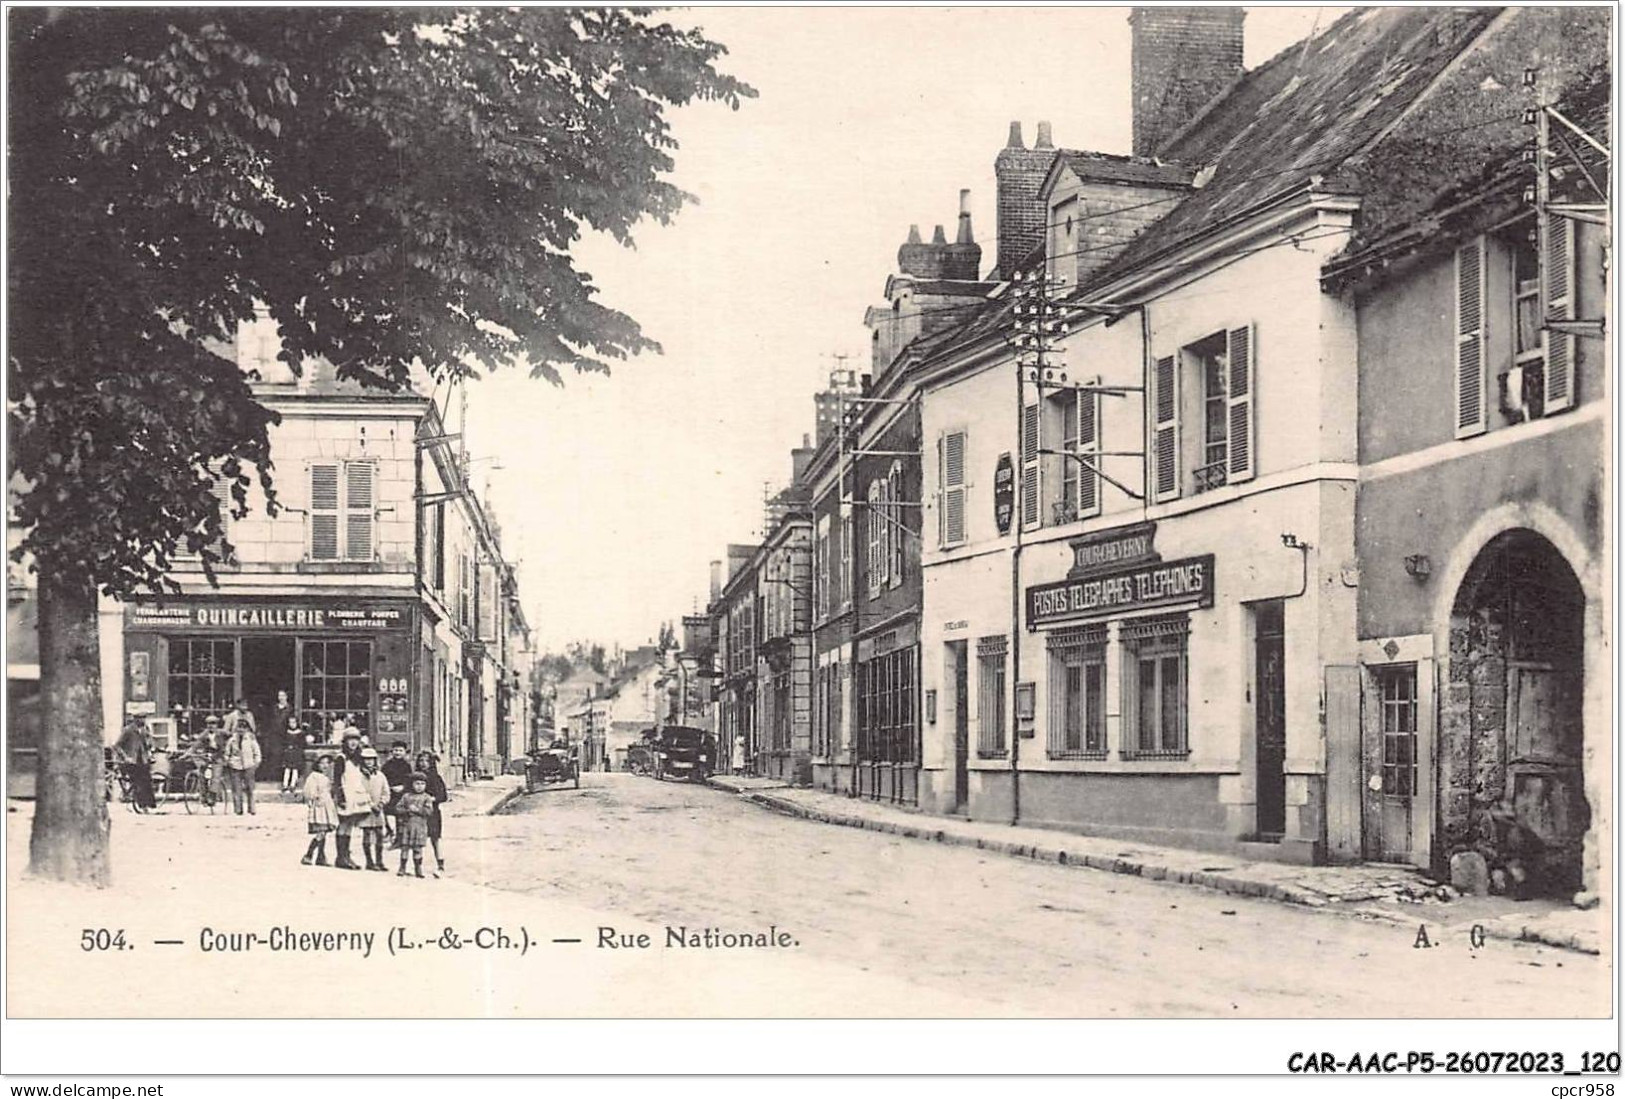 CAR-AACP5-41-0416 - COUR-CHEVERNY - Rue Nationale - Quincaillerie, Postes - Cheverny